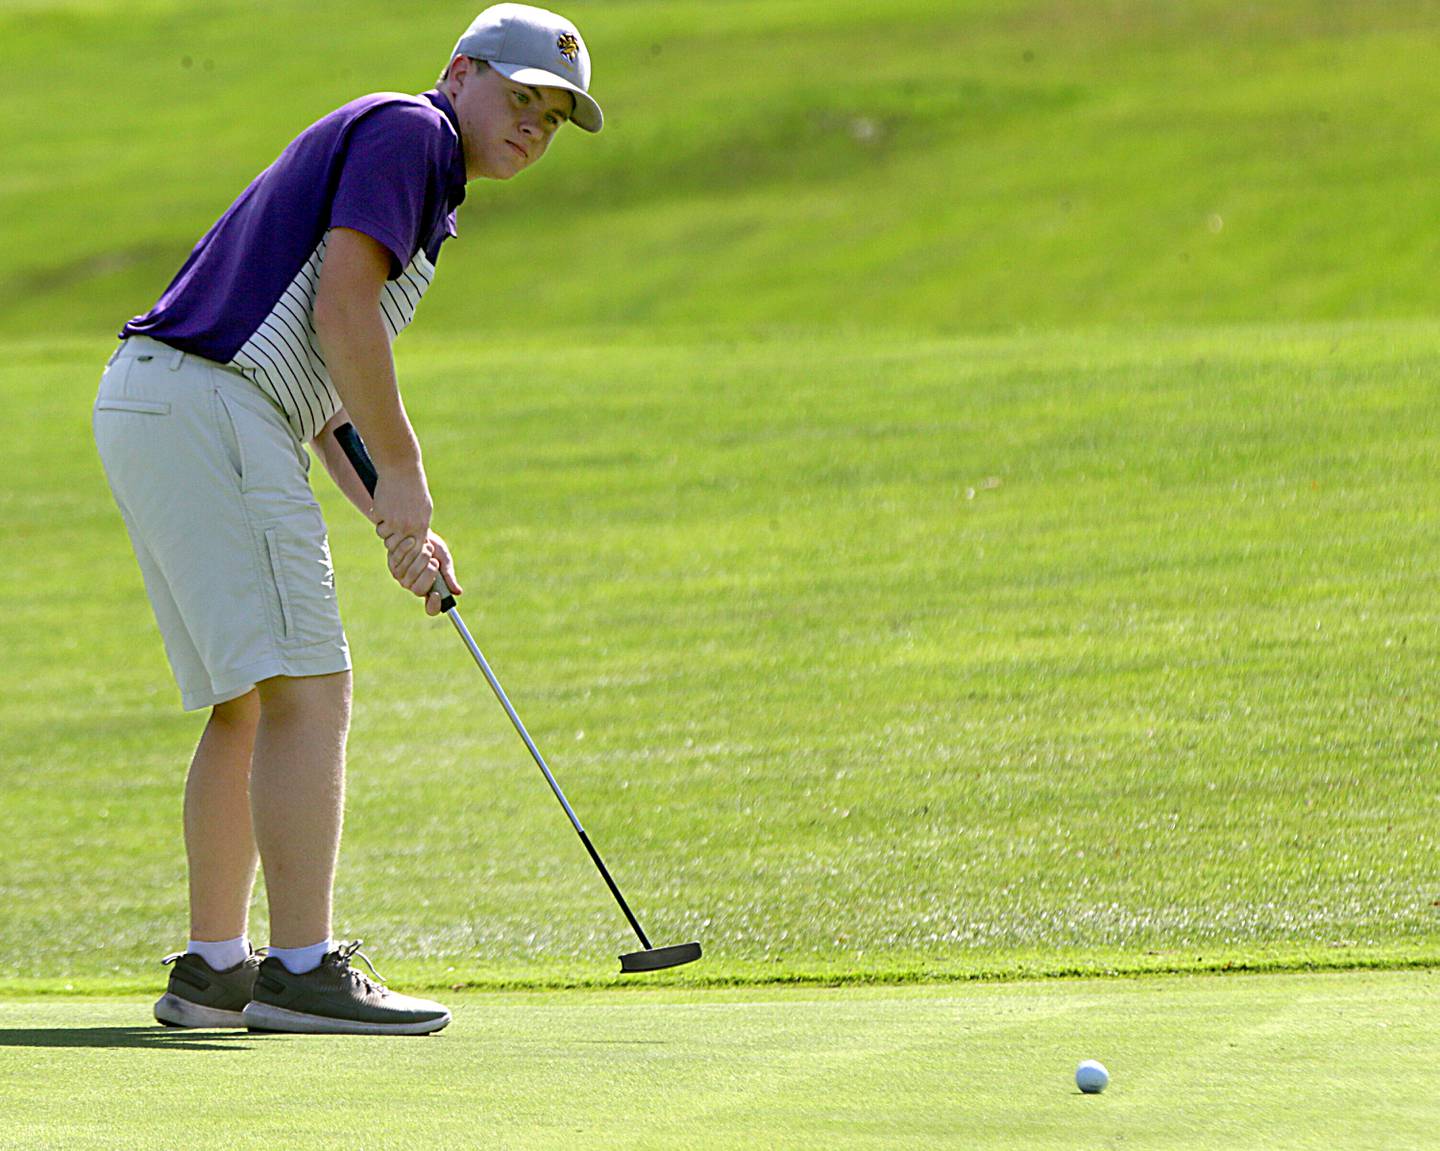 Mendota senior Ethan Hanaman advanced to Monday's sectional in DeKalb after placing sixth at the Class 2A regional meet at Deer Park Golf Club in Oglesby on Wednesday Sep. 29, 2021